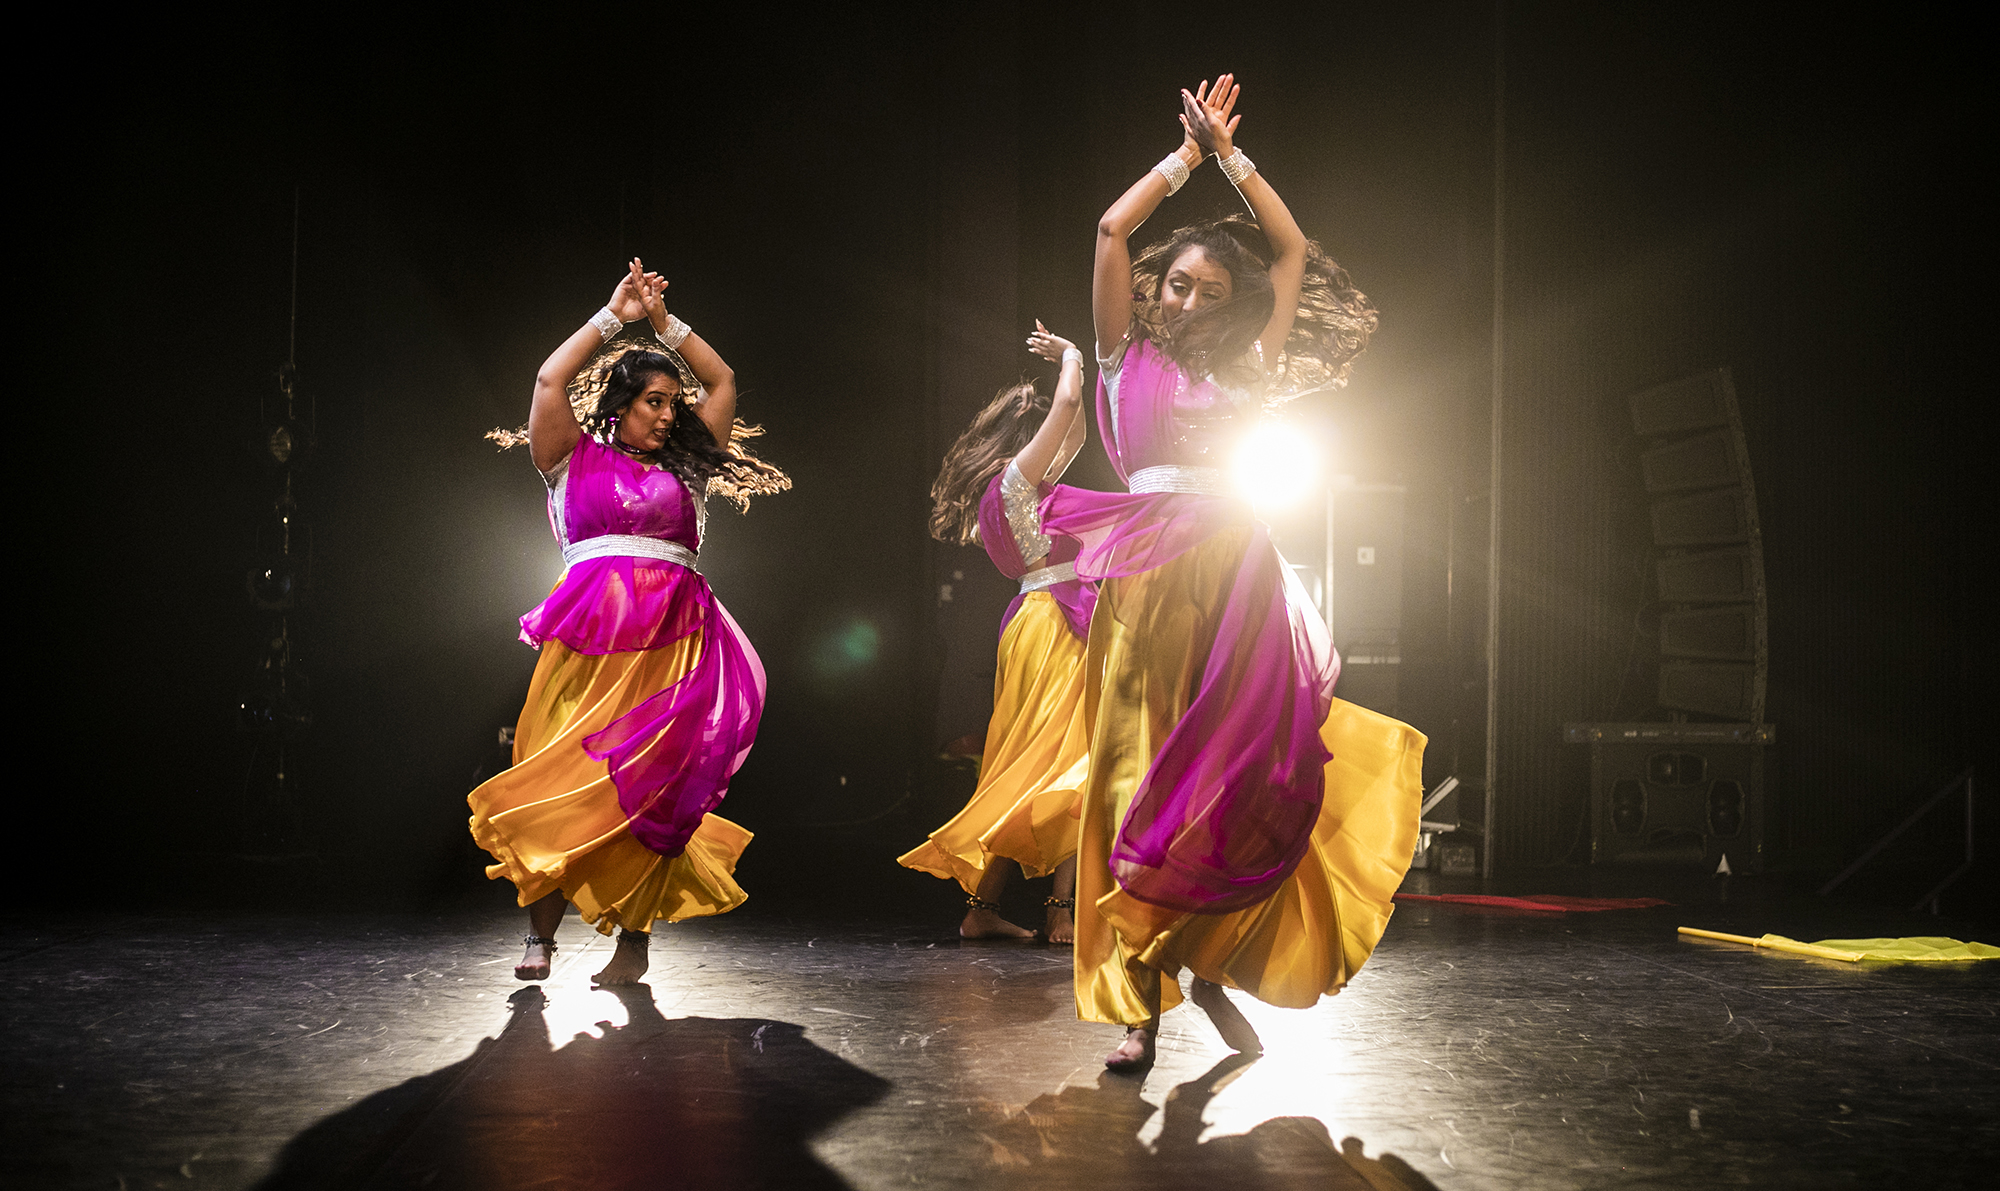 Three female Bollywood dancers spinning on a dark stage wearing pink and yellow sari dresses.